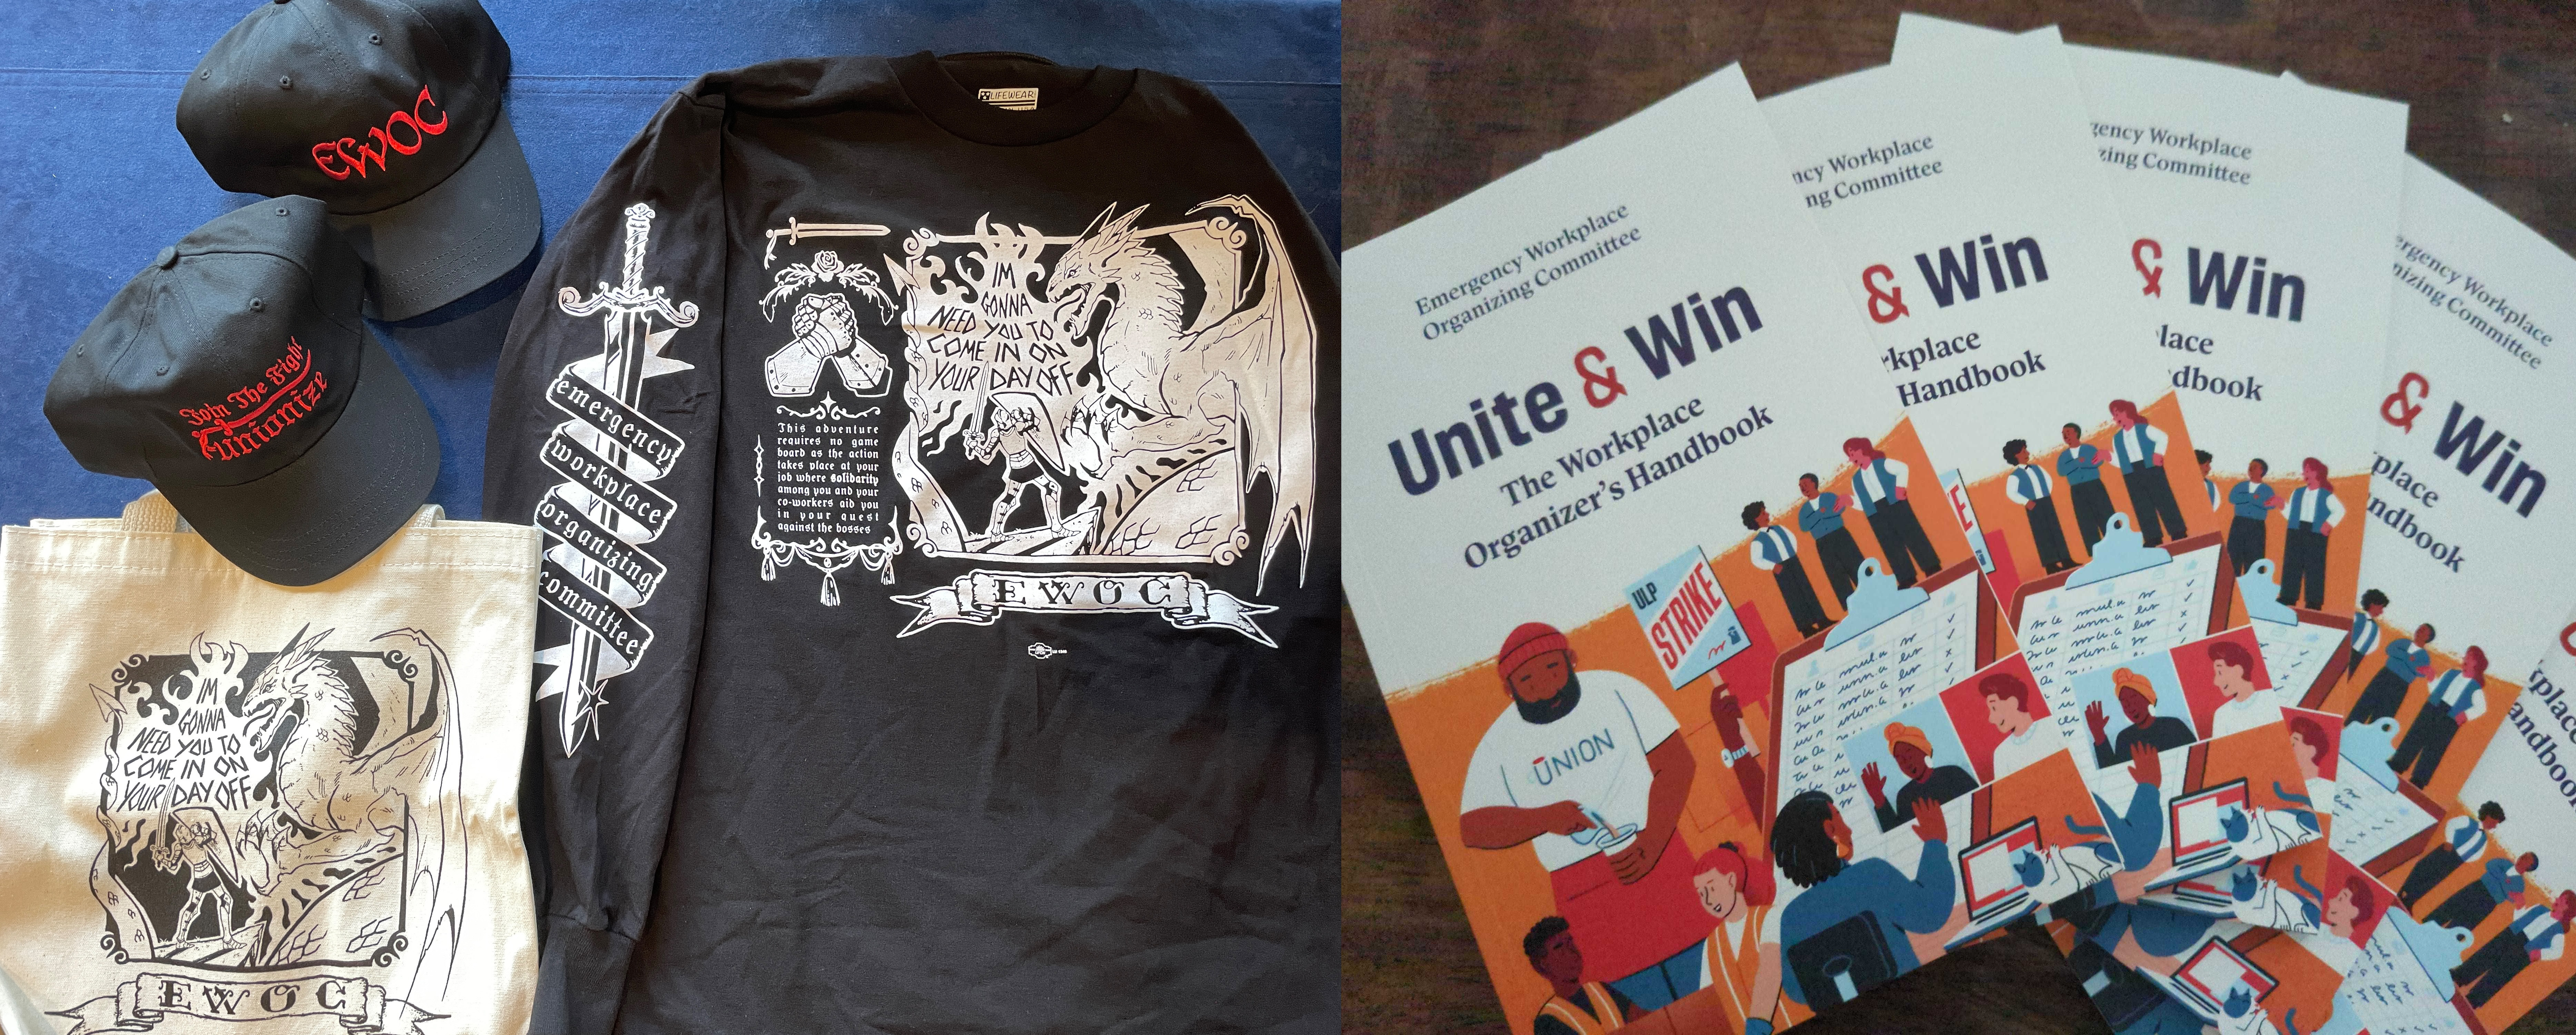 Samples of EWOC merch and copies of "Unite and Win" at our vendor booth